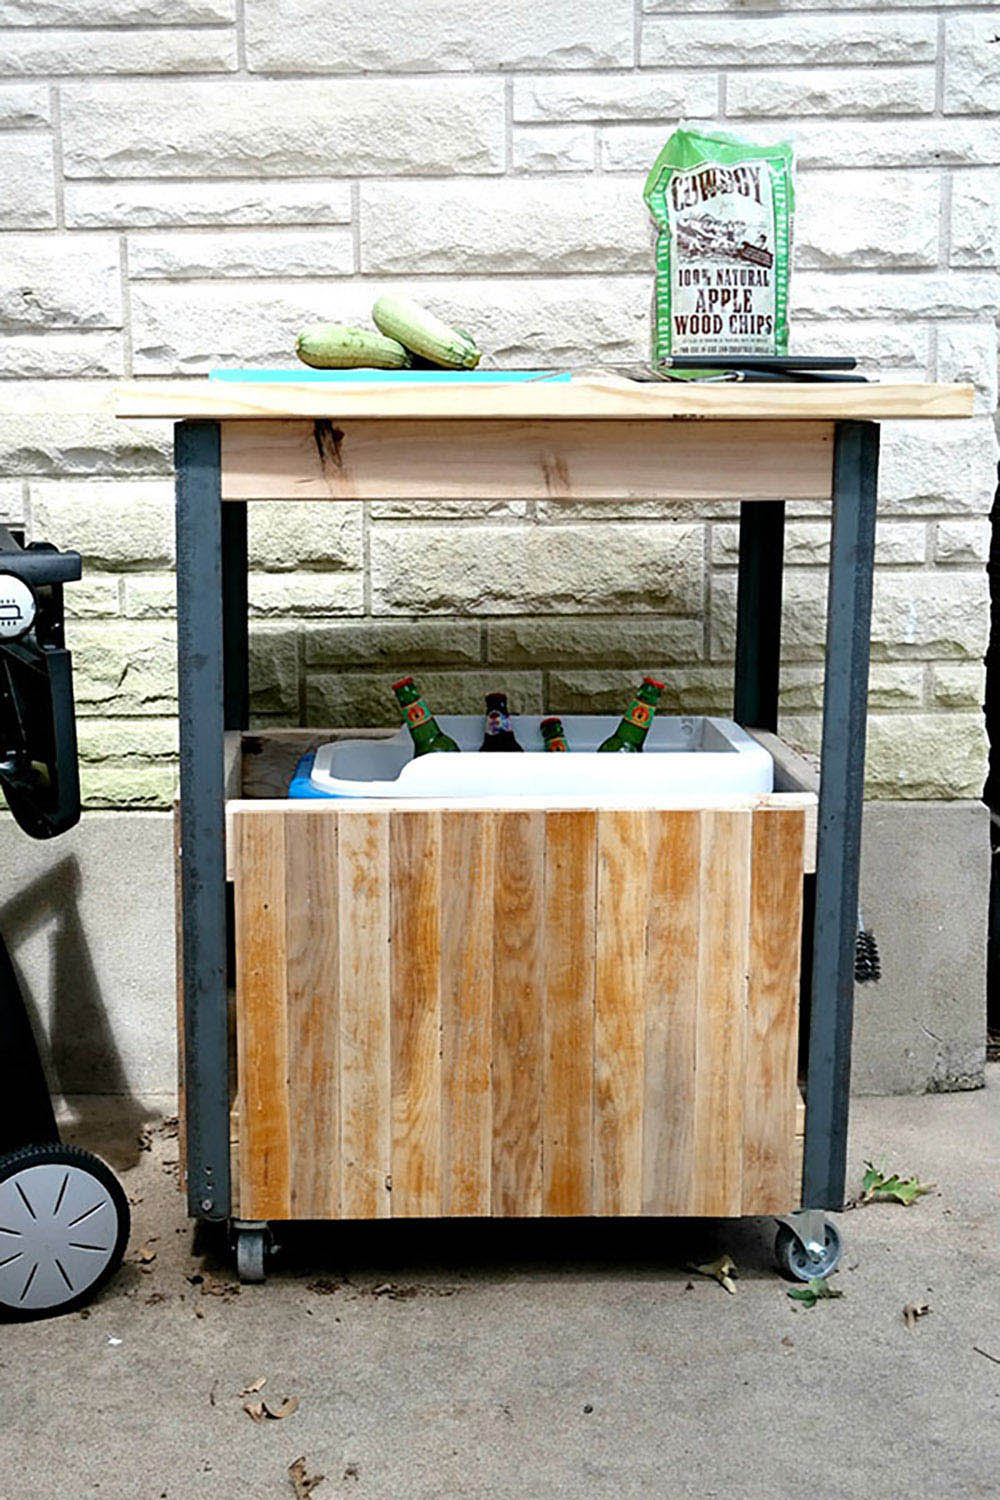 A DIY grill cart with a cooler enclosure on the bottom.